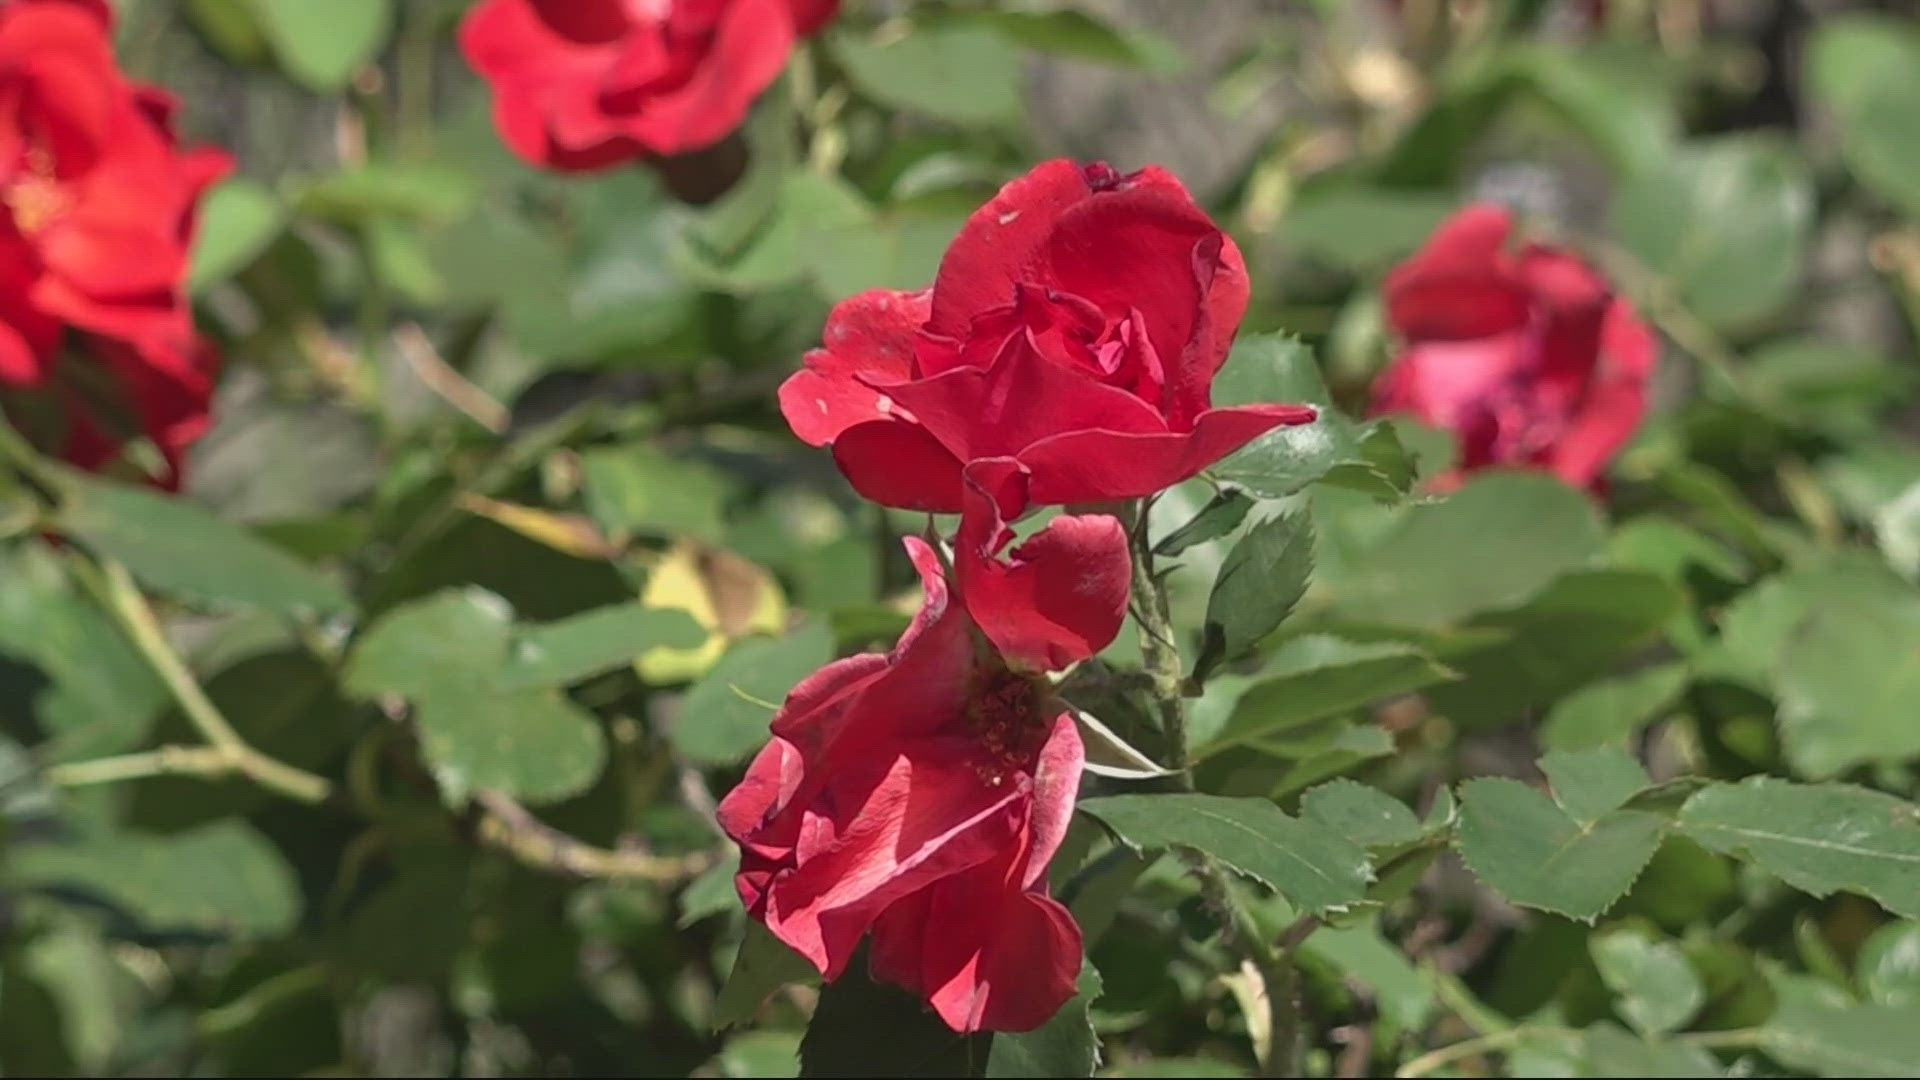 With the Portland area sweltering this weekend and into next week, plants need extra care. A local nursery has some advice on how to keep them alive.